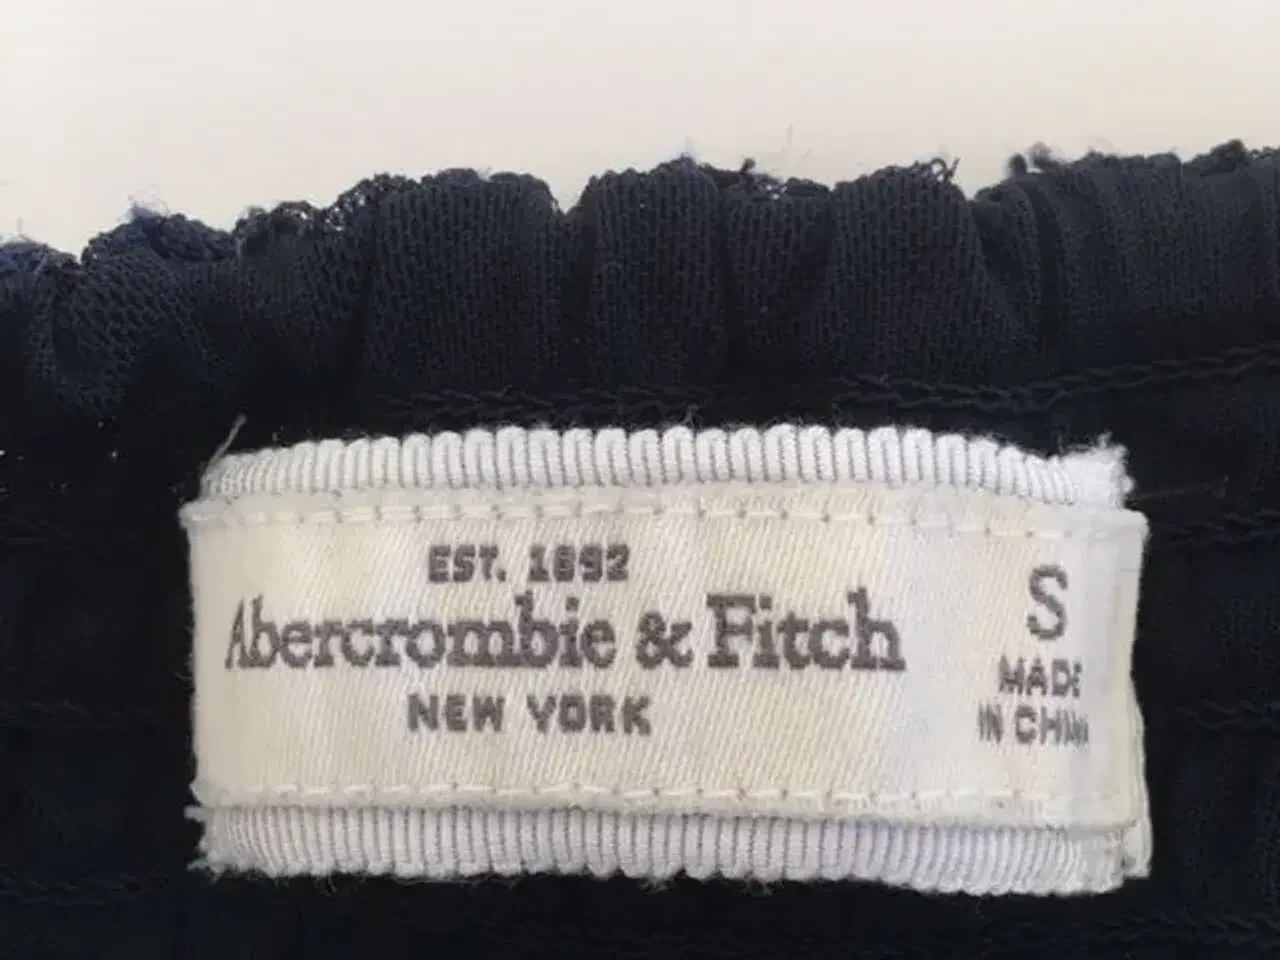 Billede 3 - Top Abercrombie & Fitch